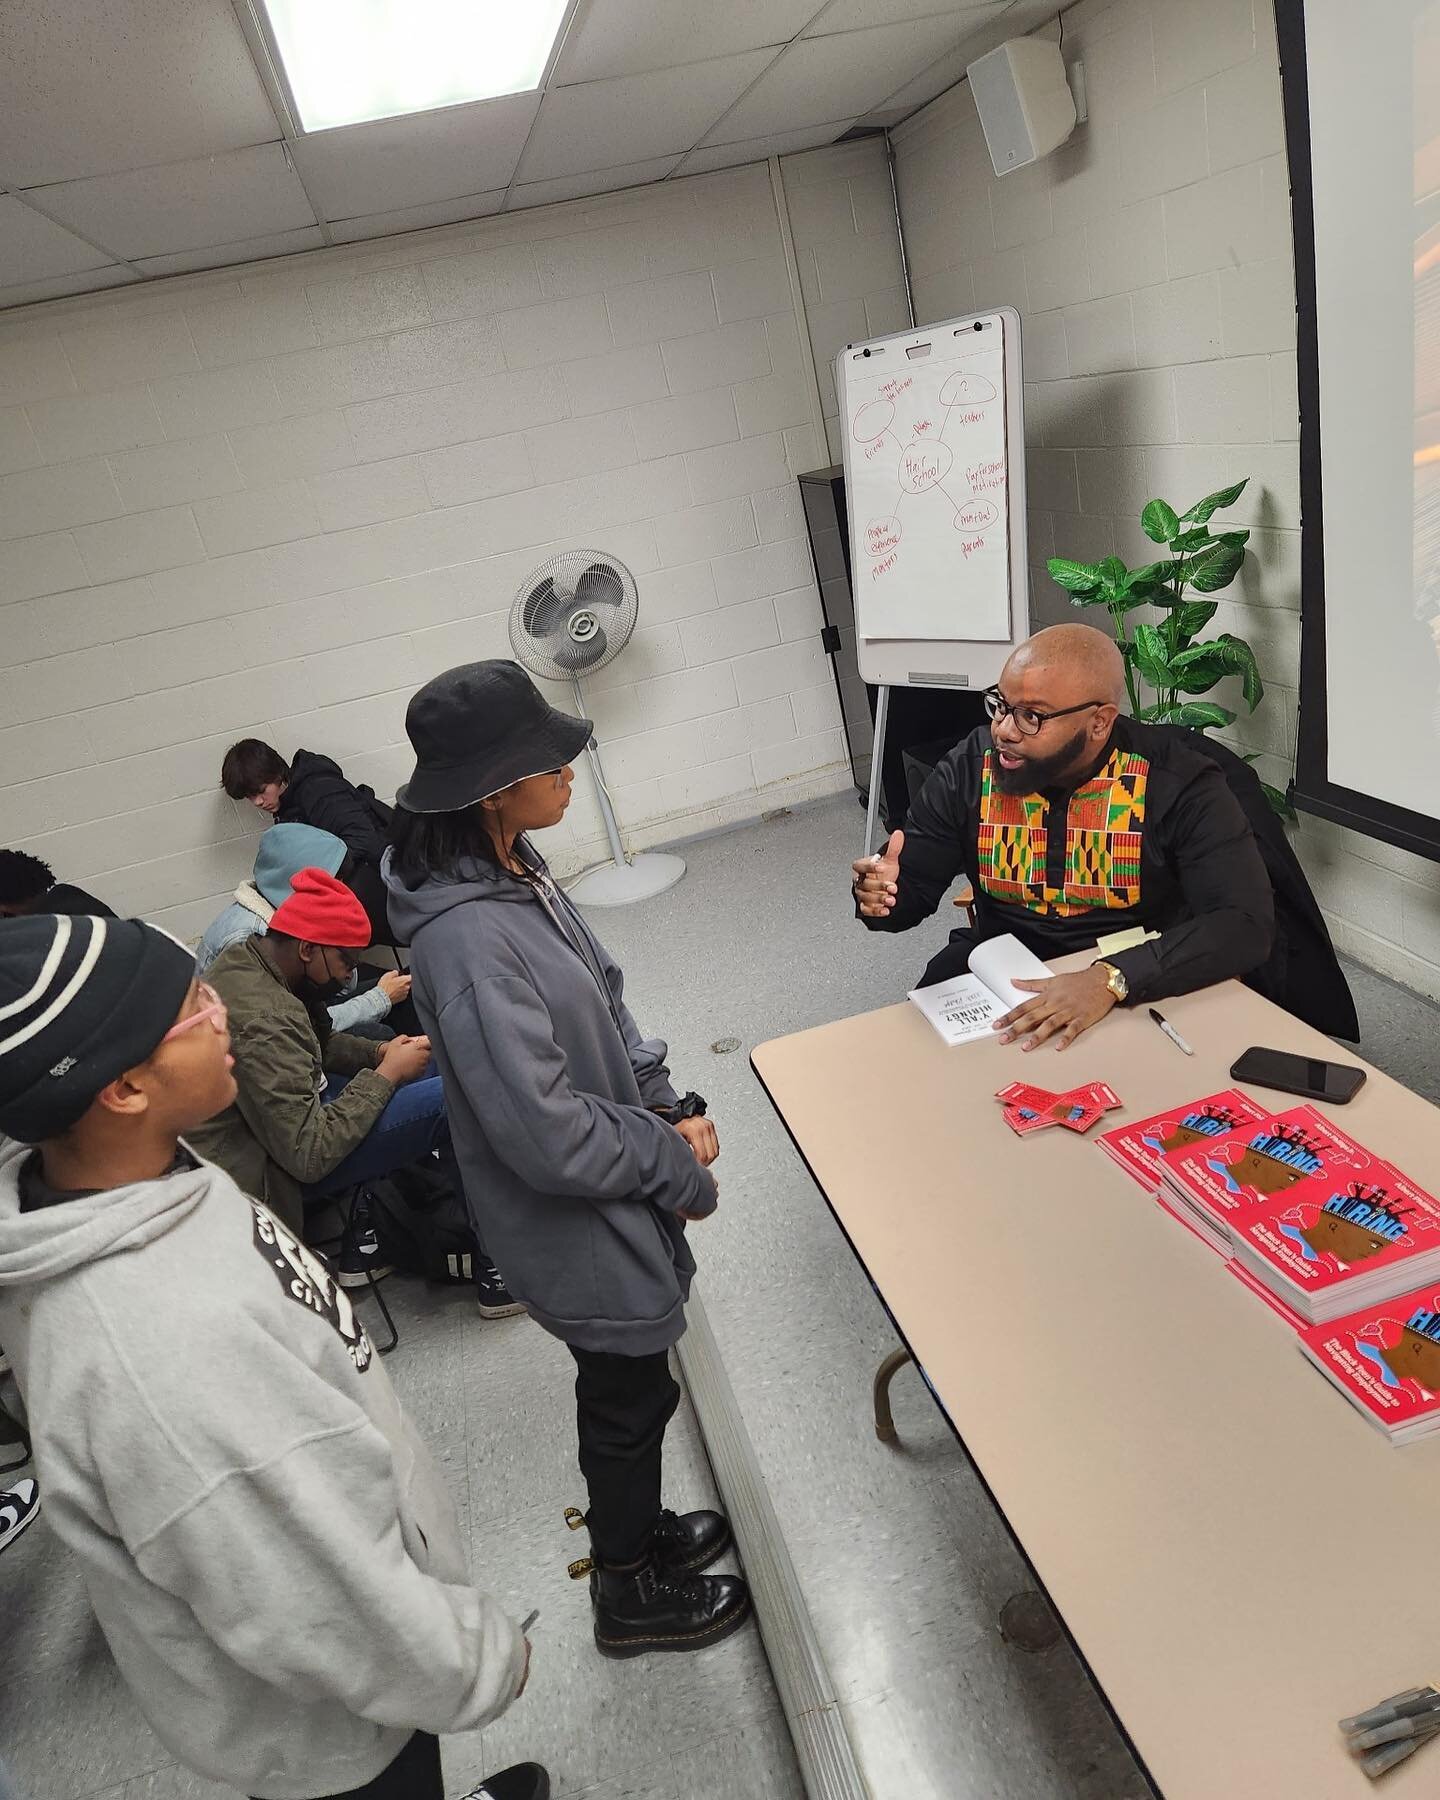 For Black History Month, I partnered with @prattlibrary to converse with 100 Baltimore area teens about navigating employment, goal attainment, and book publishing. This type of intimate, in-person experience has been on my wish list since I publishe